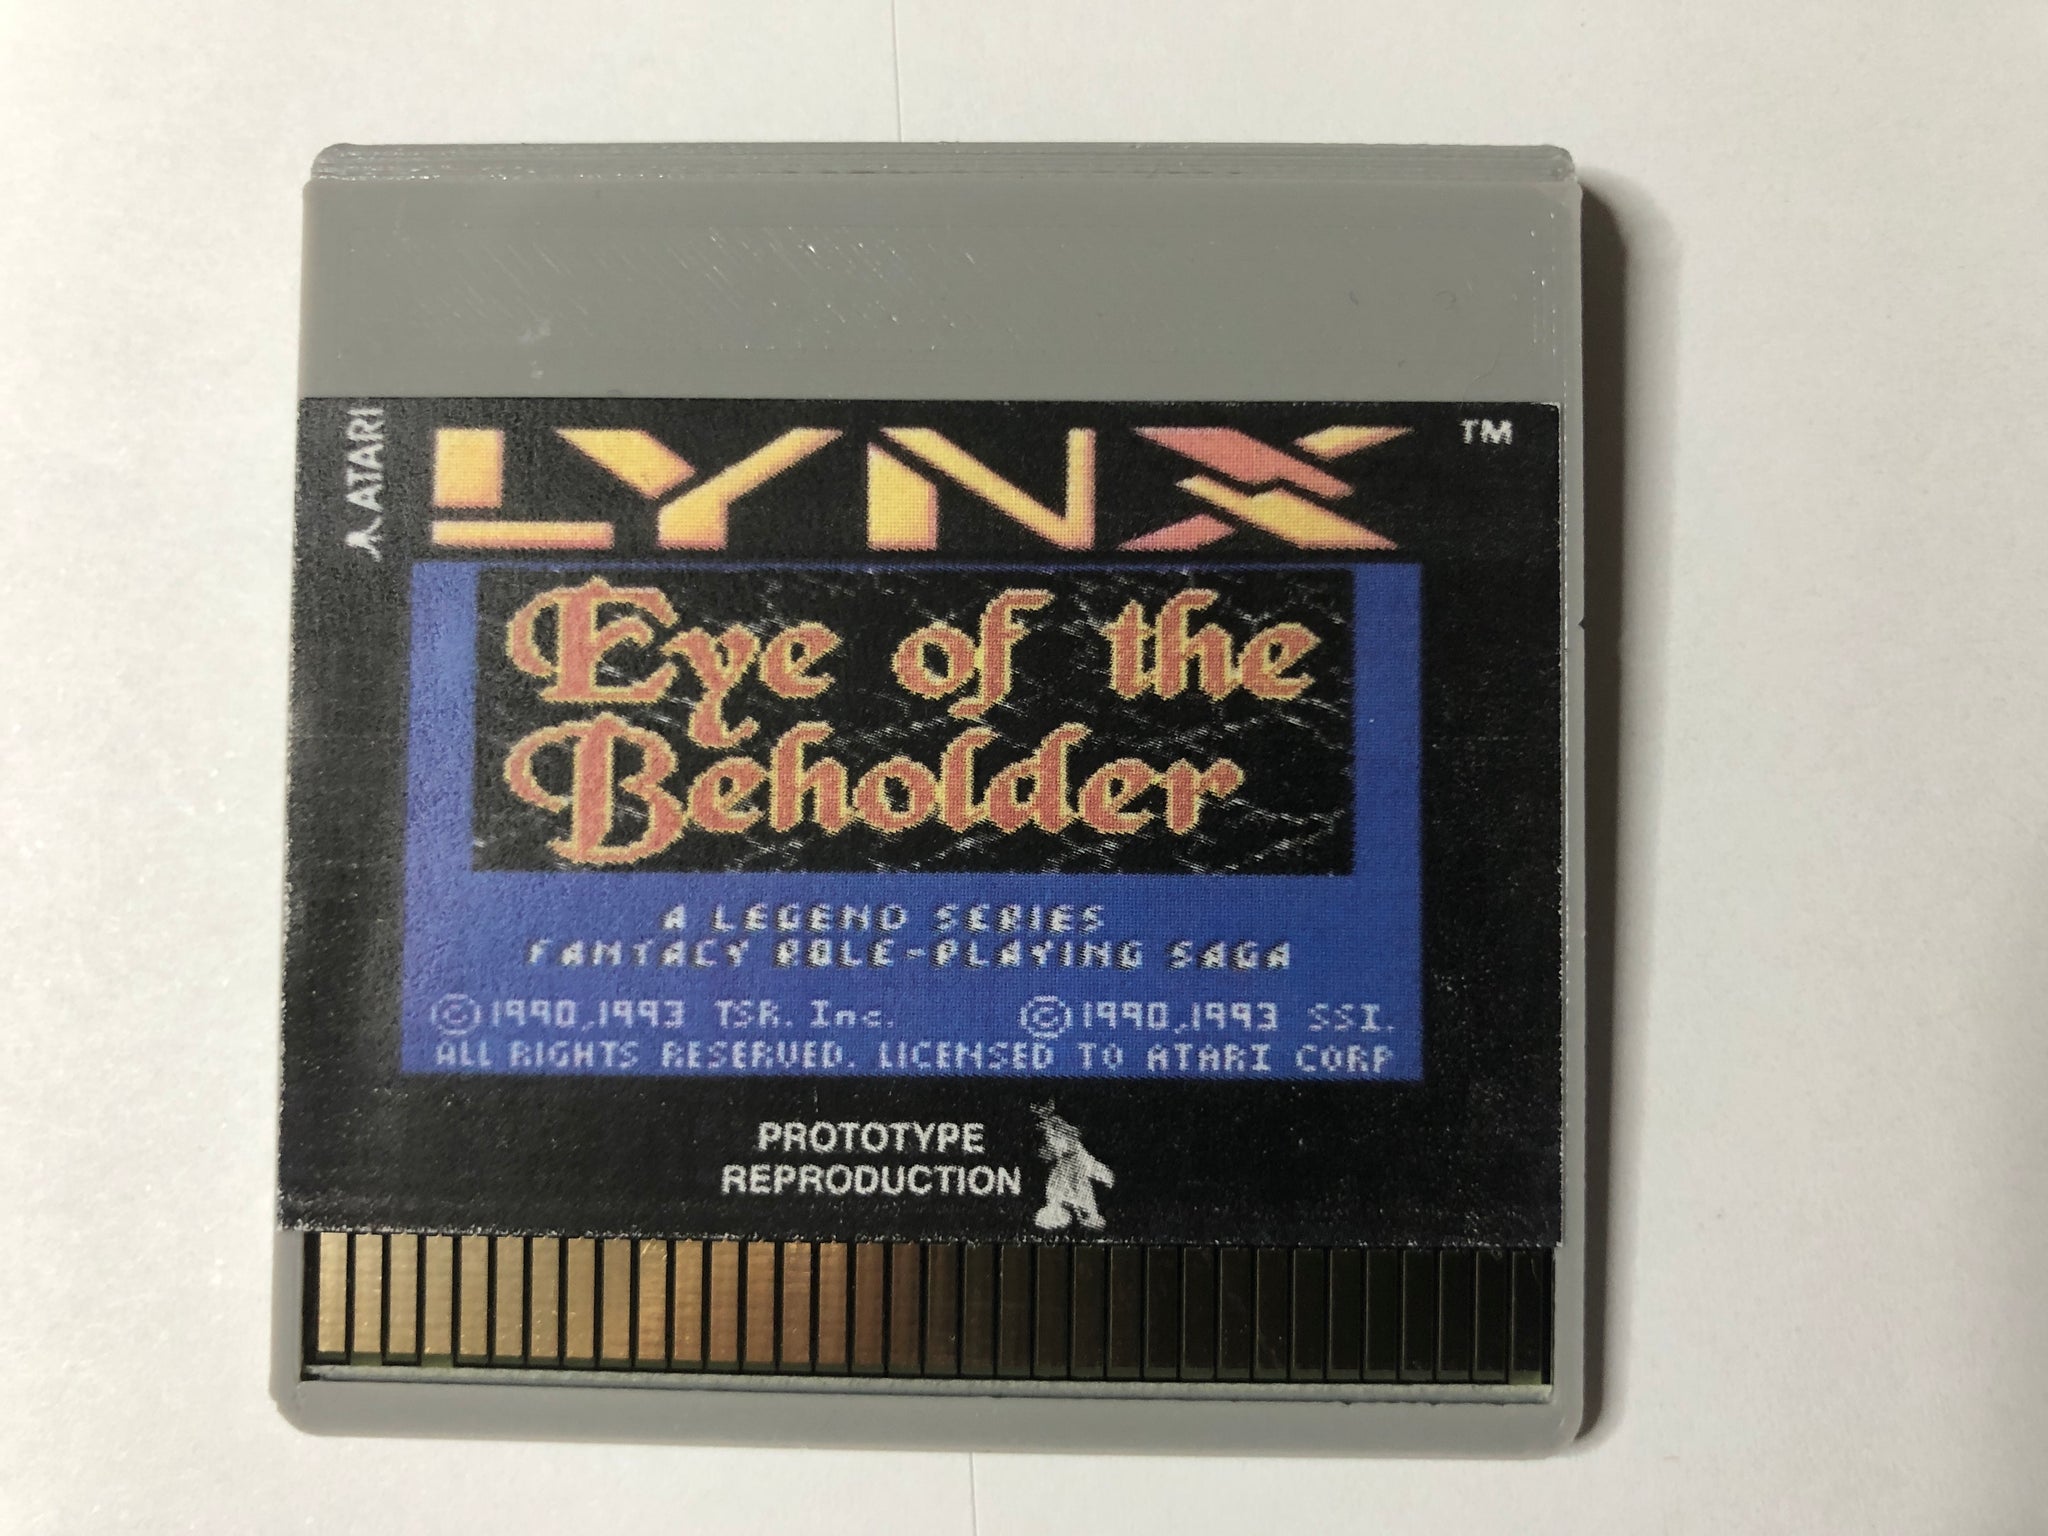 "Eye of the Beholder" Prototype Reproduction